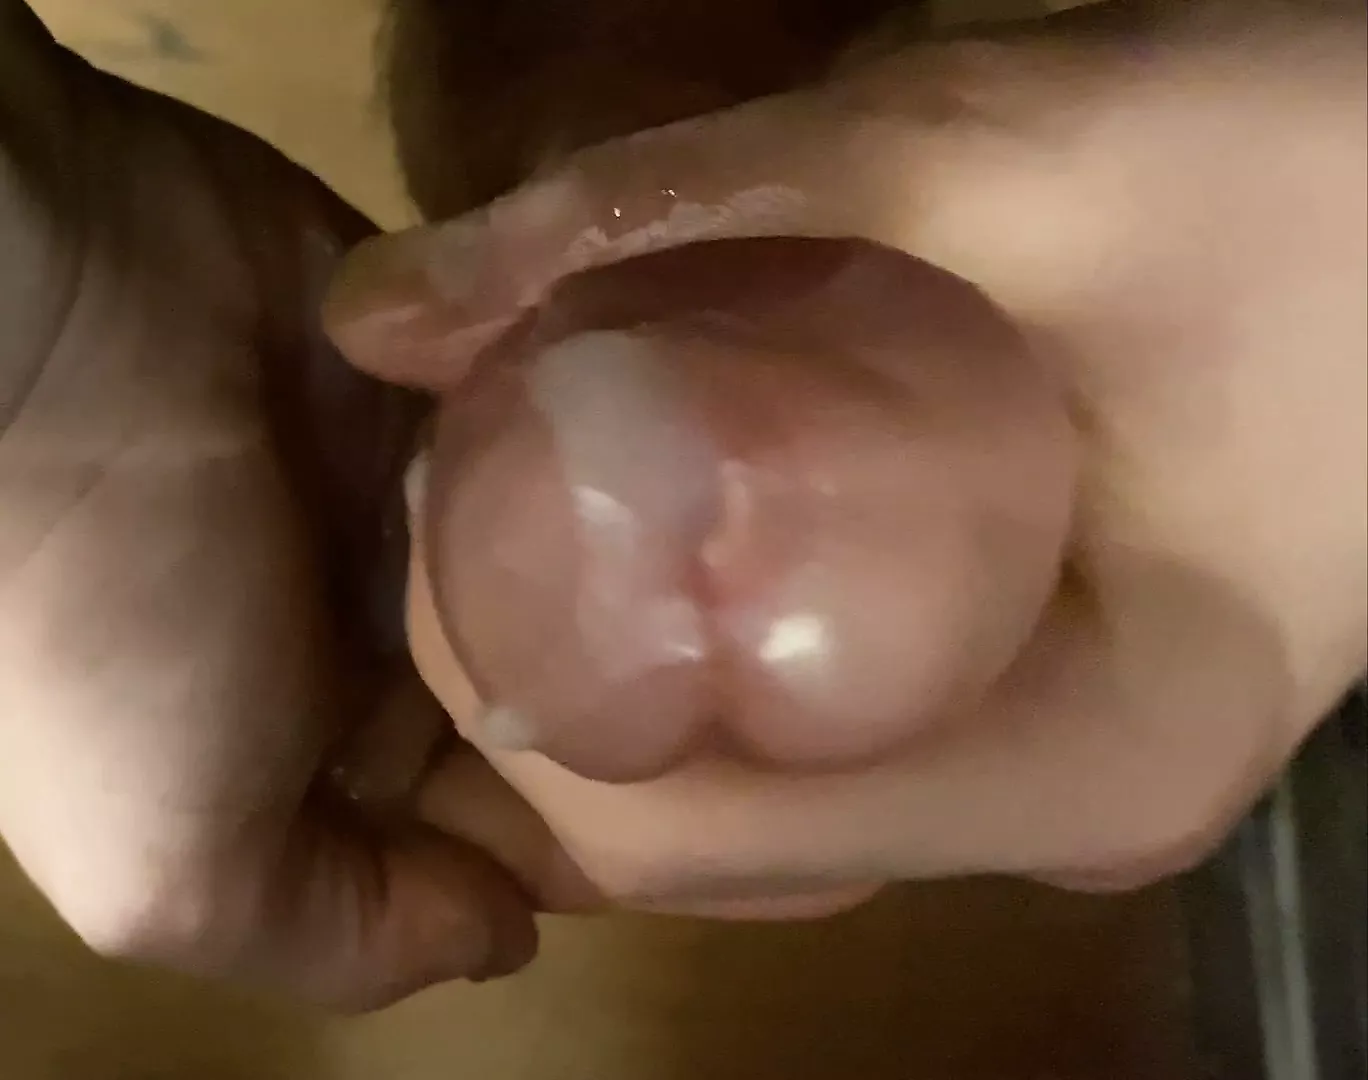 Jerk Off Close Up - closeup jerk off and cum while moaning | xHamster